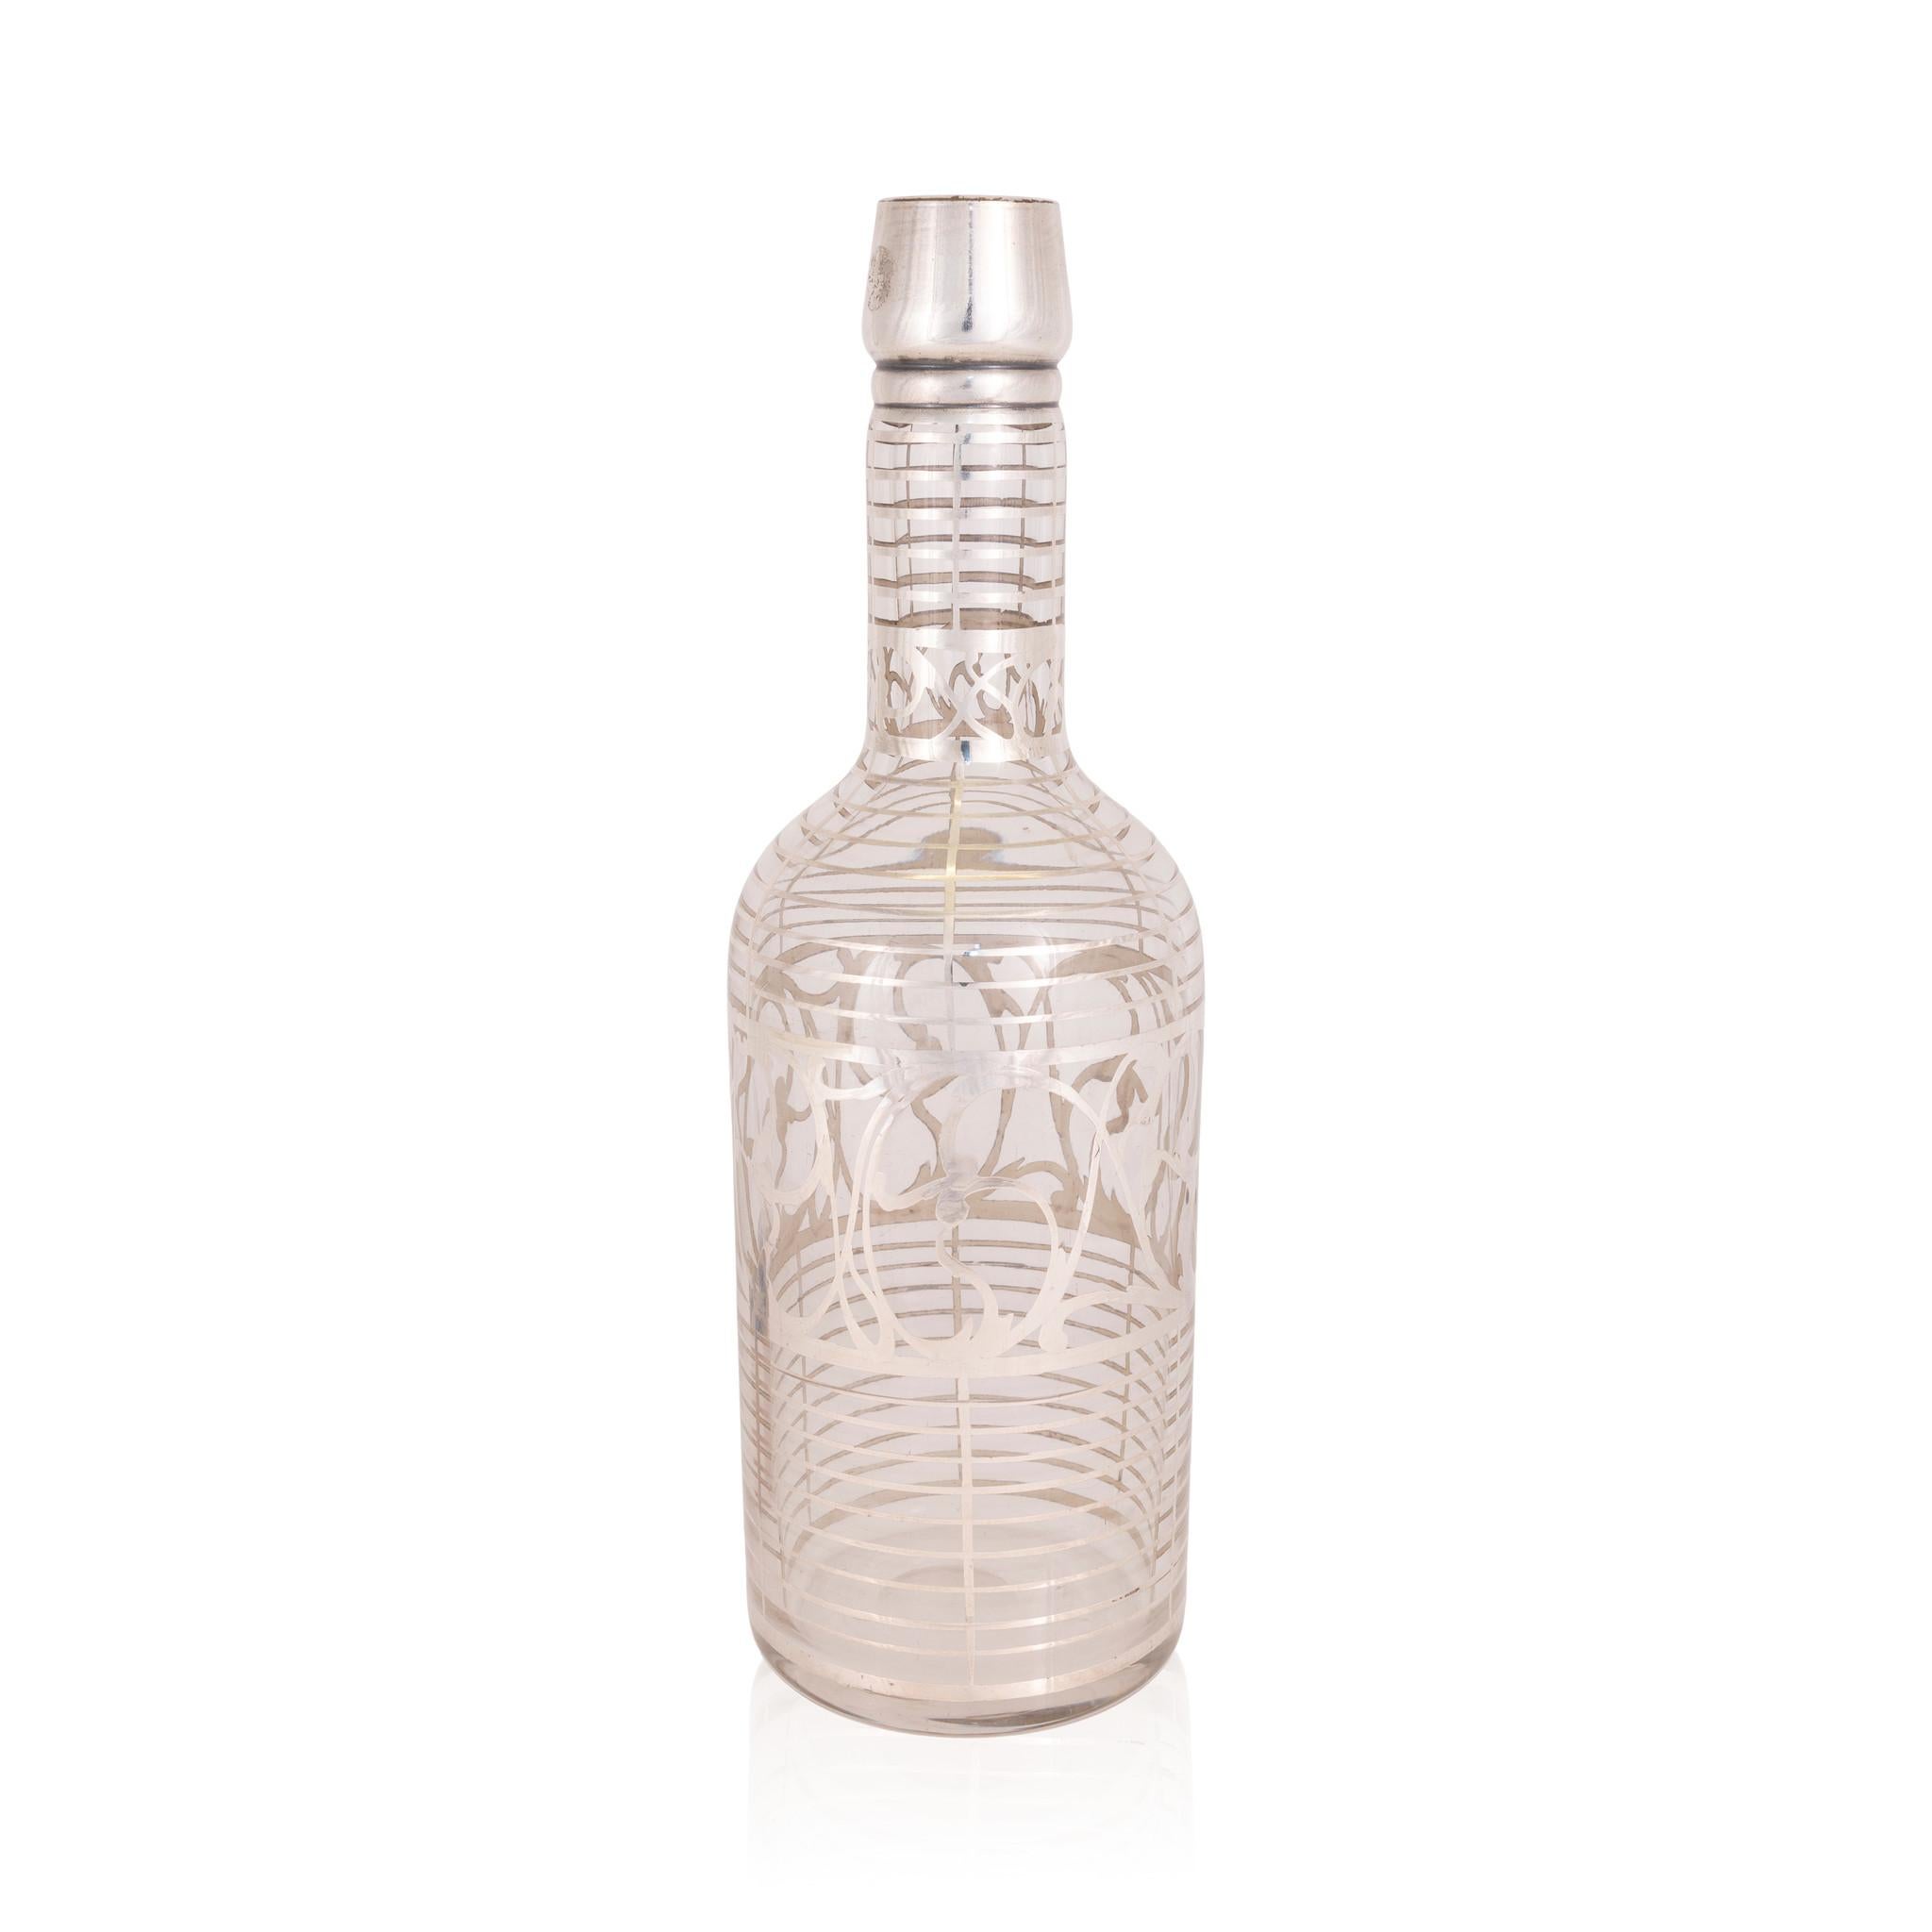 Back bar bottle with sterling overlay. Features a beautiful art nouveau style design. 

Period: Last quarter of the 19th century
Origin: United States
Size: 3 1/2